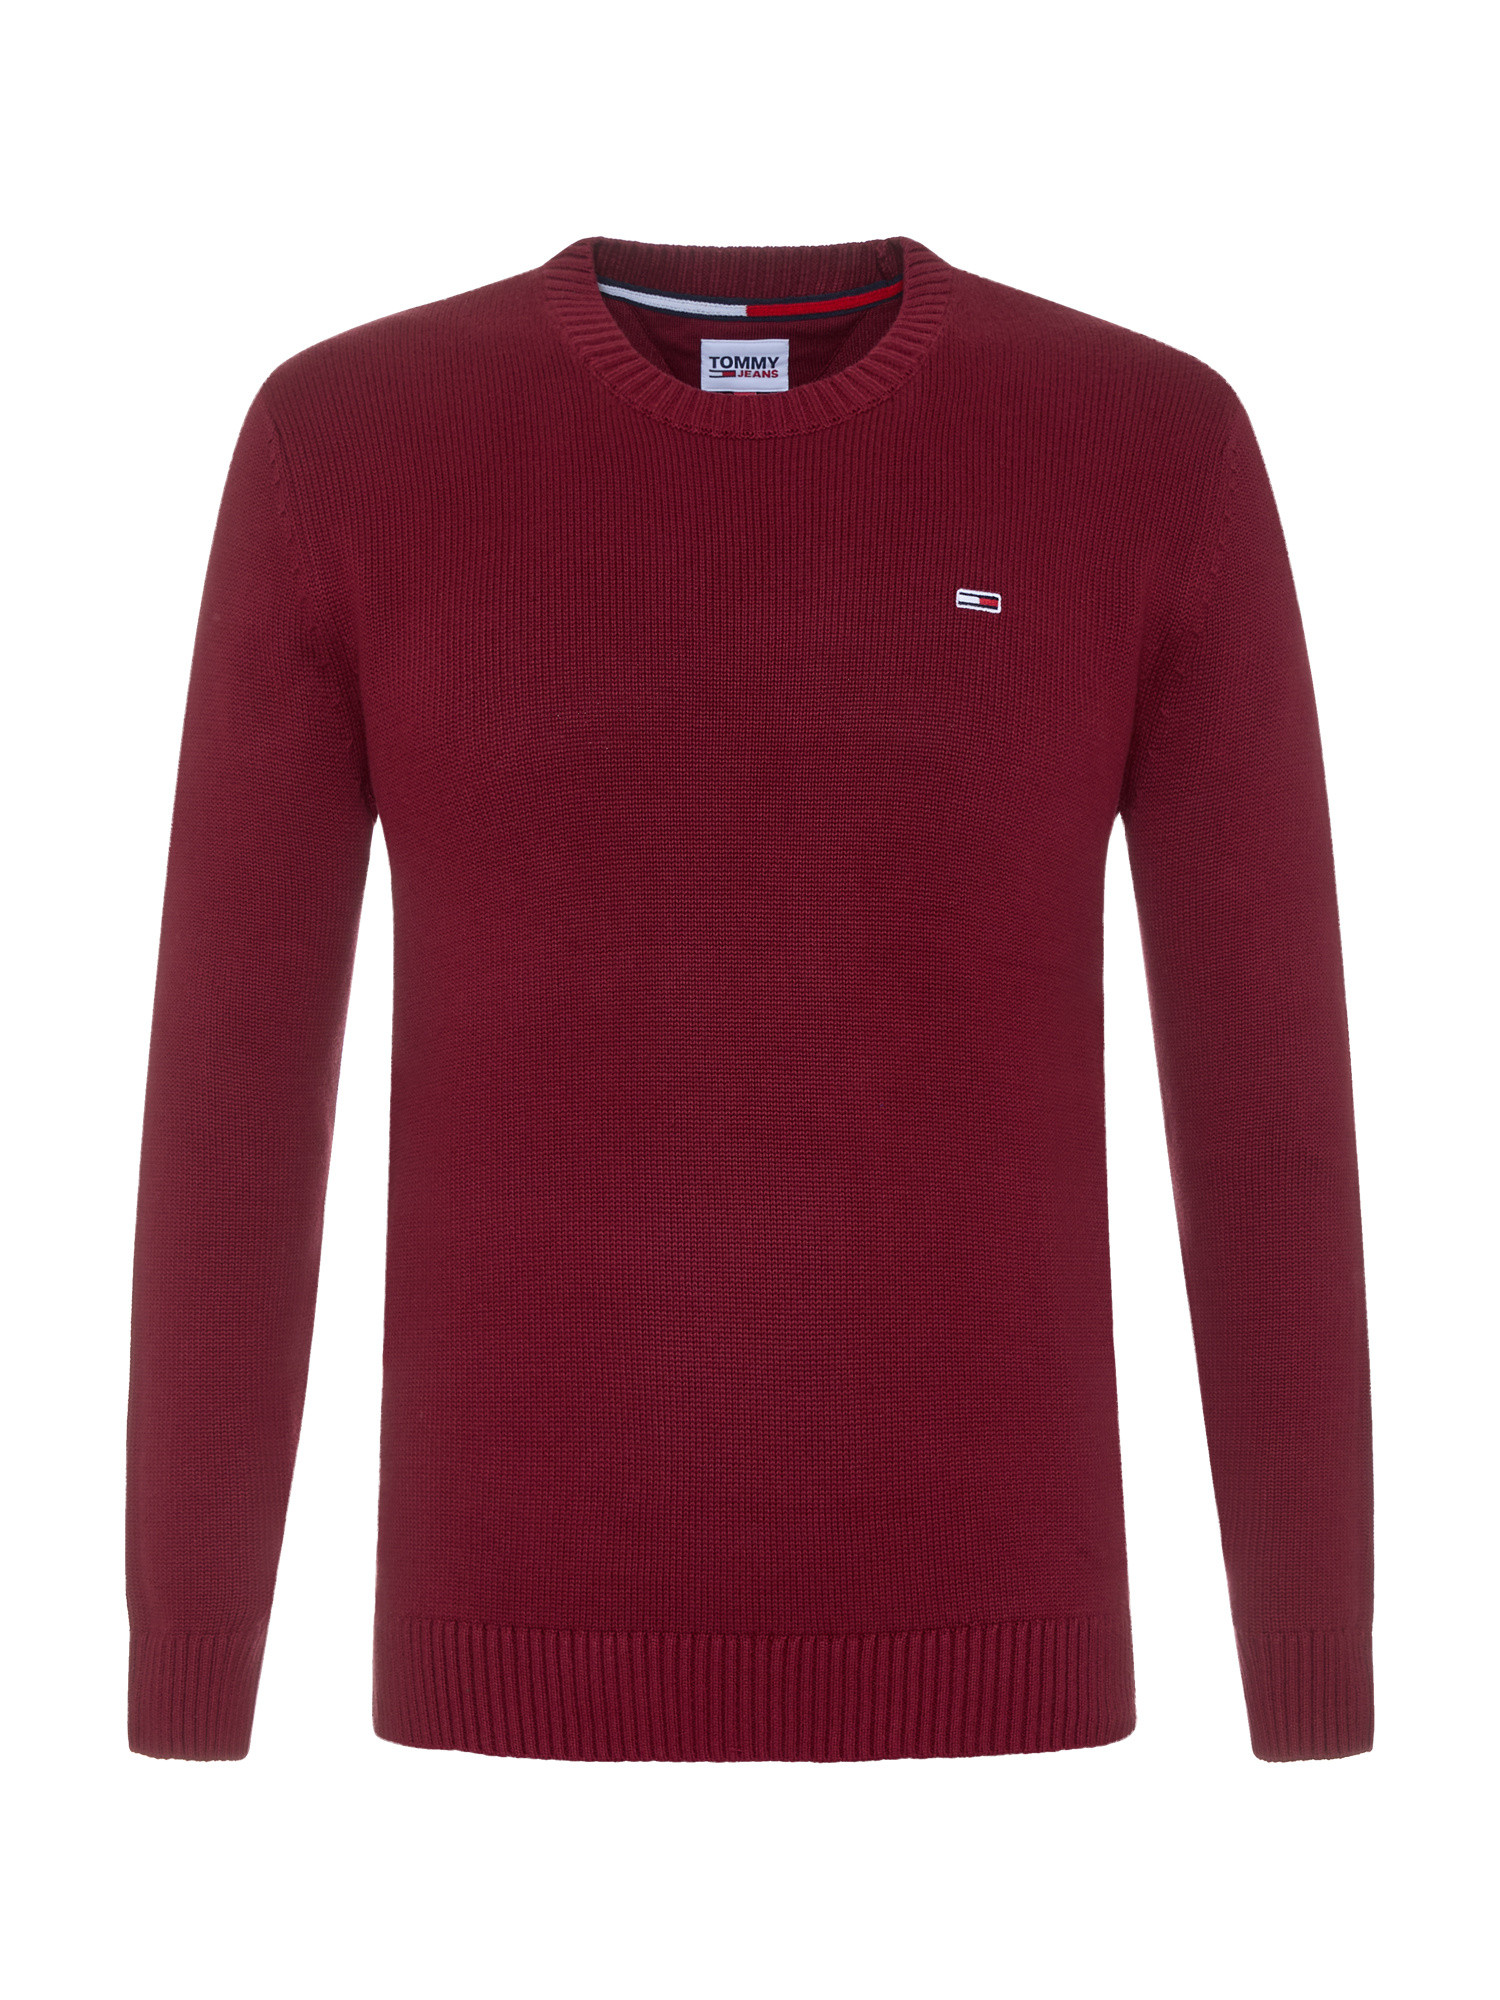 Tommy Jeans - Pullover in cotone regular fit con micro logo, Rosso, large image number 0